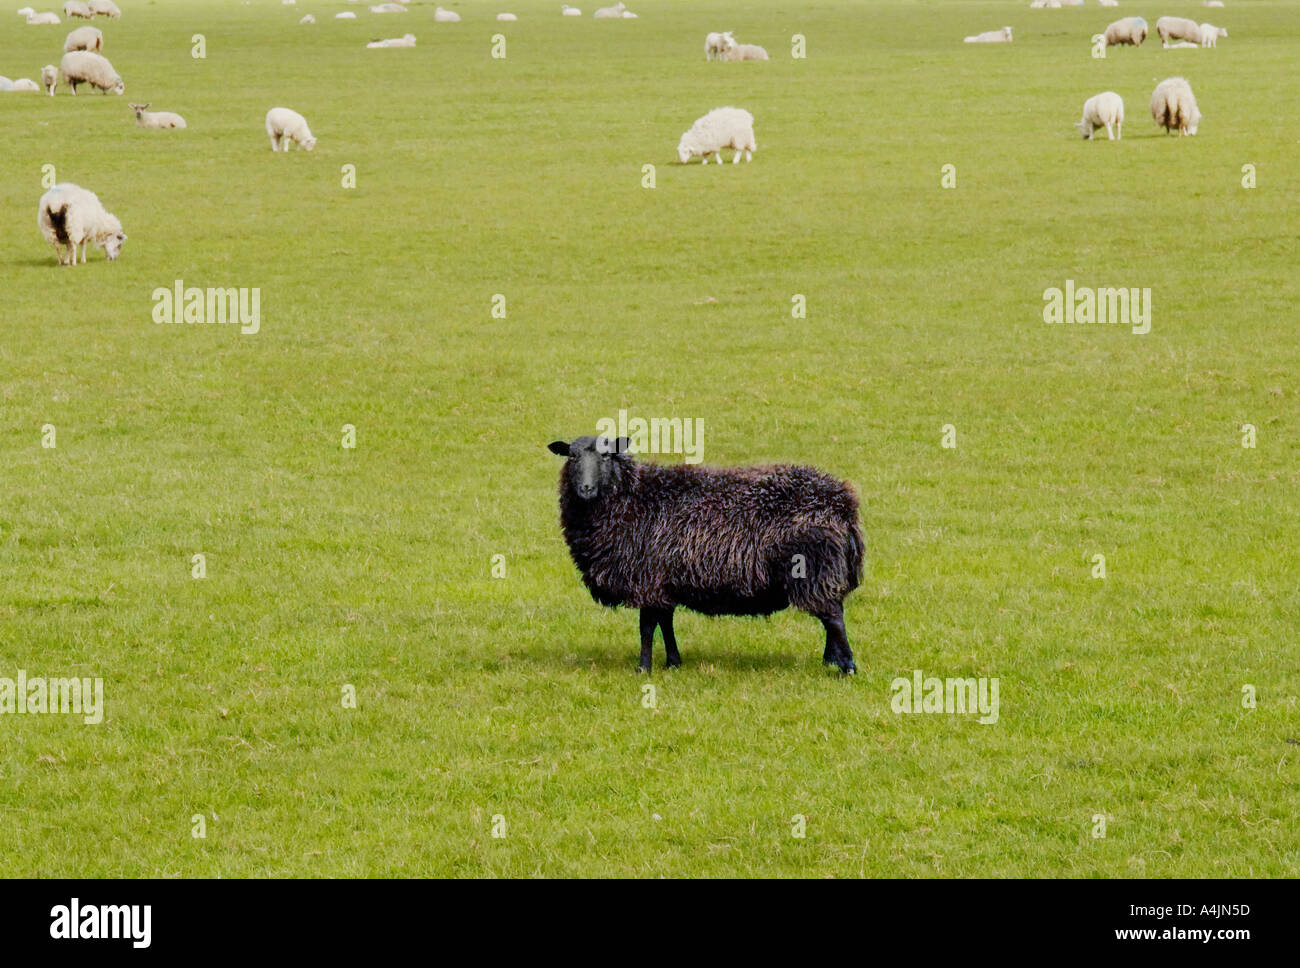 The Outsider The Black Sheep of the Family Stock Photo